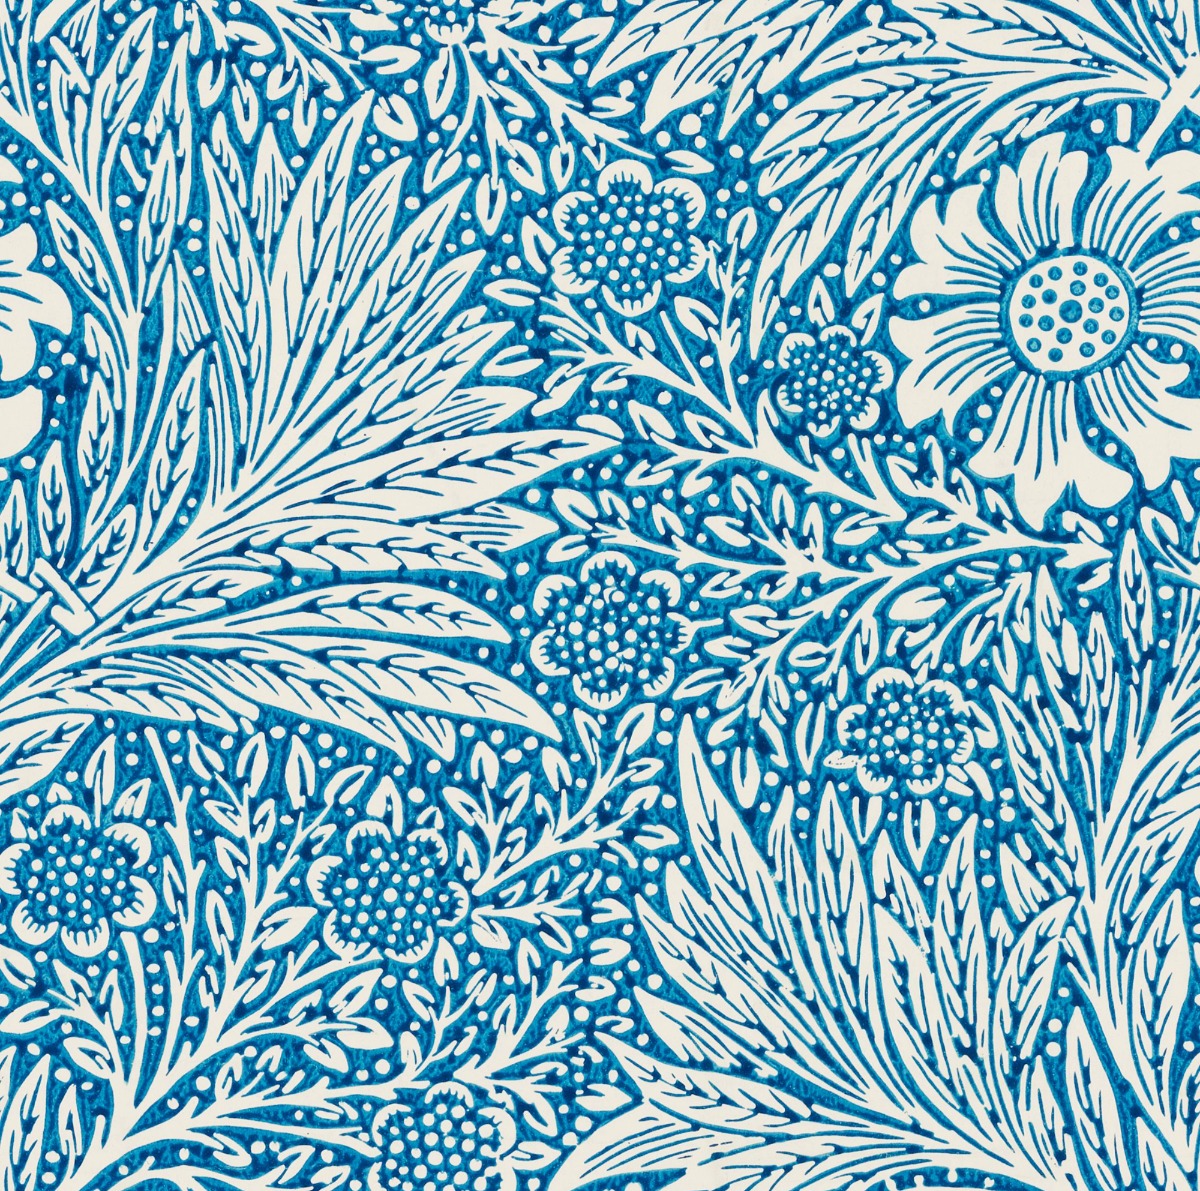 A seamless fabric texture with william morris marigold textile units arranged in a None pattern